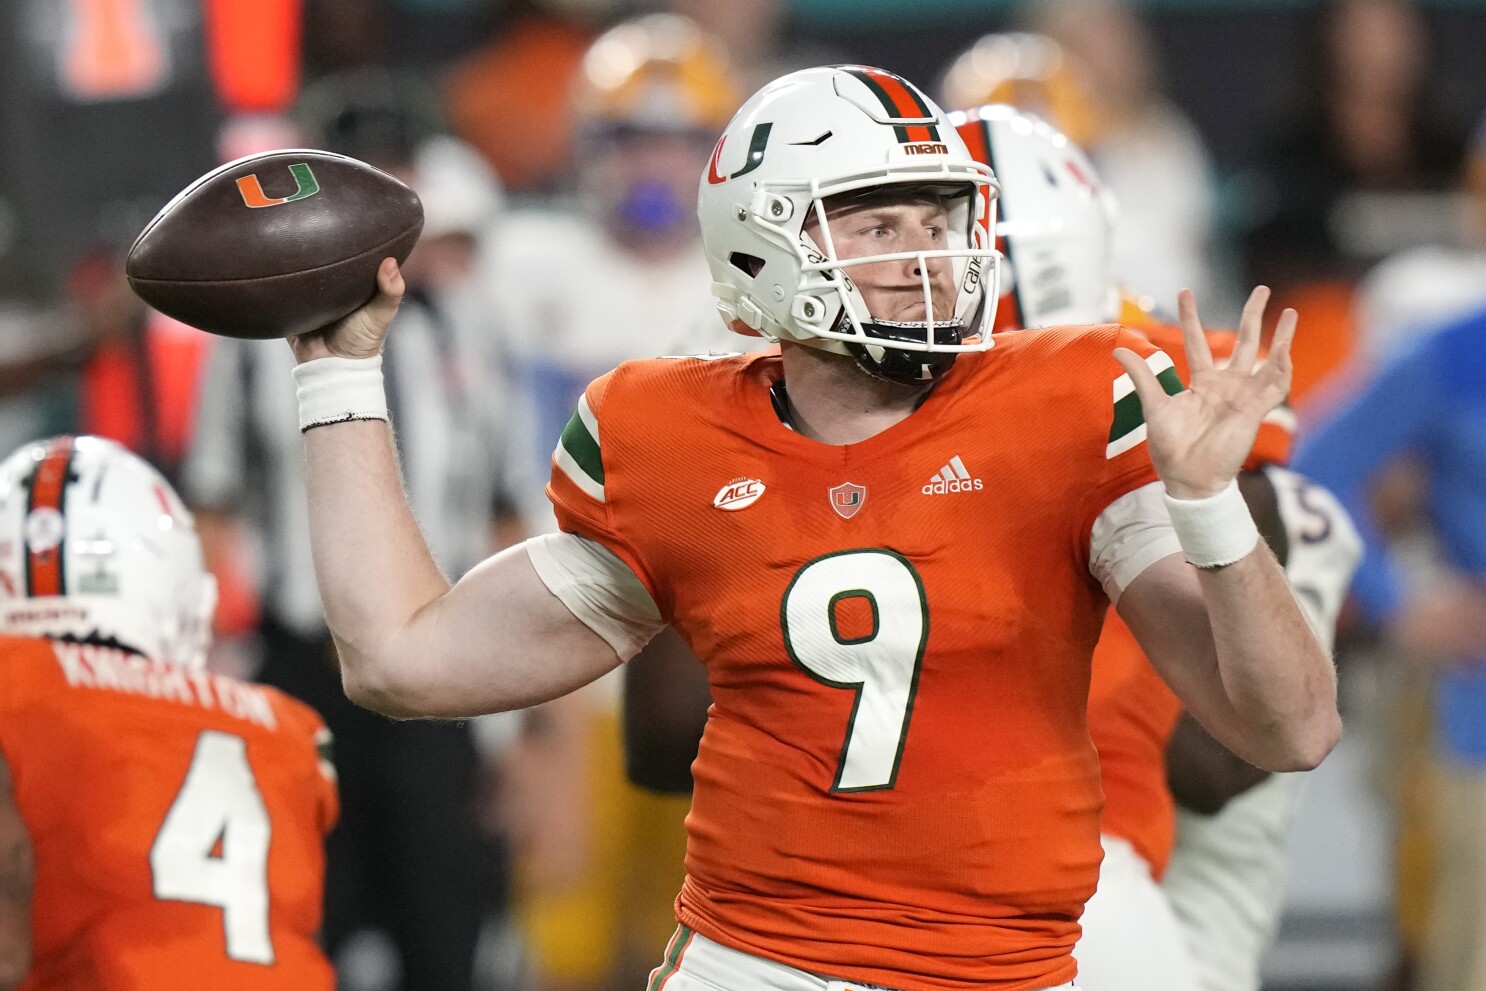 Without Van Dyke, Miami rallies and stuns Clemson 28-20 in double OT  thriller